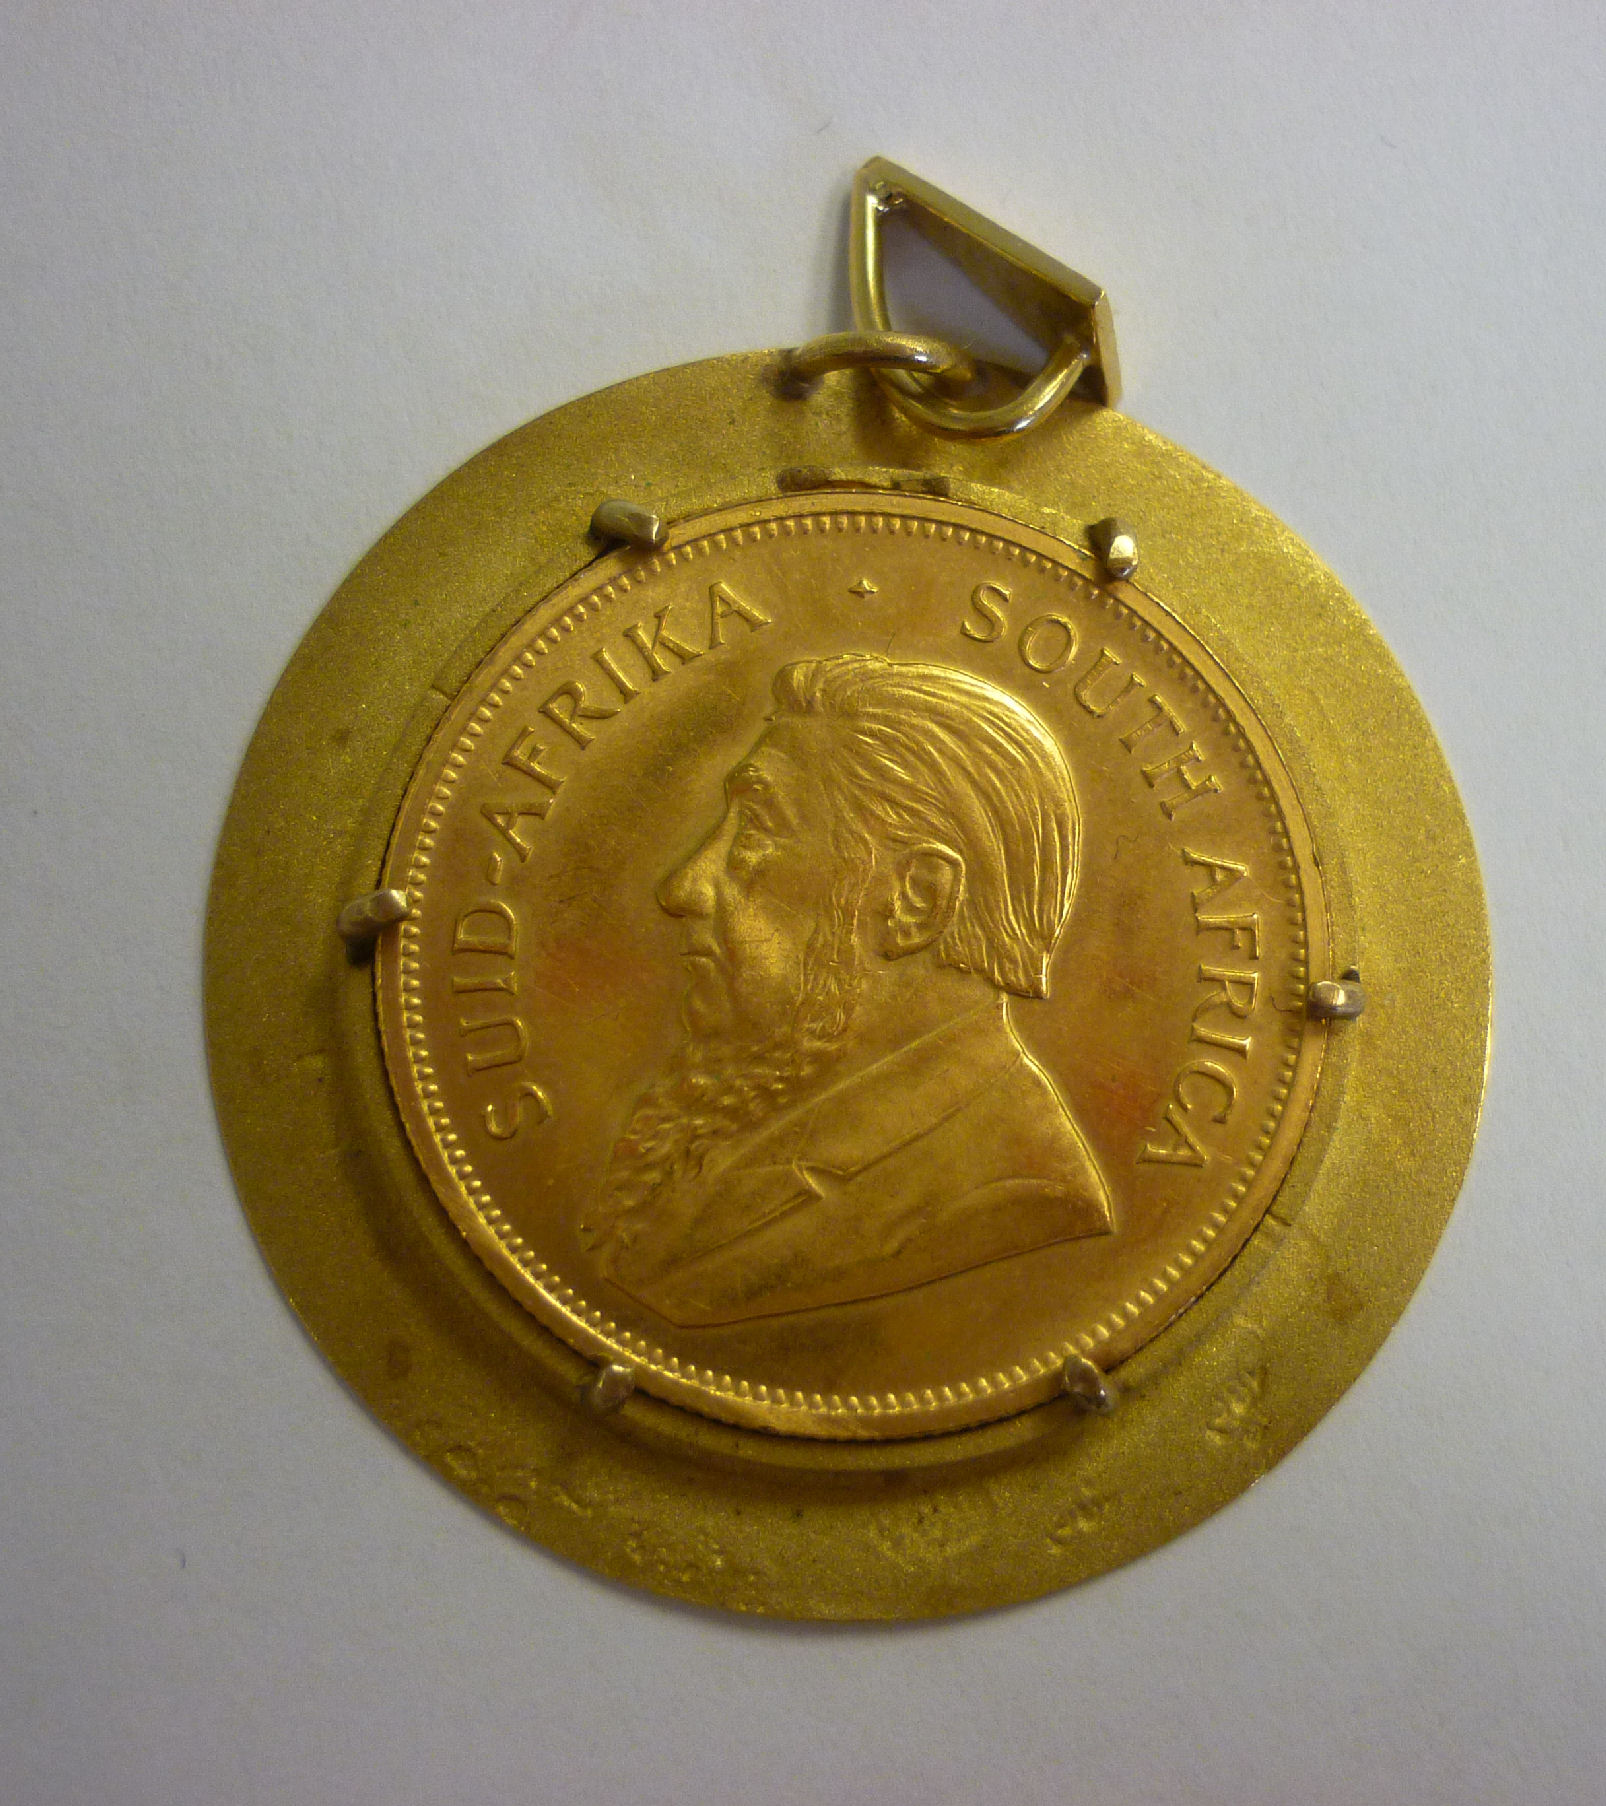 A 1977 krugerrand, set in a textured yellow metal frame with a pendant loop